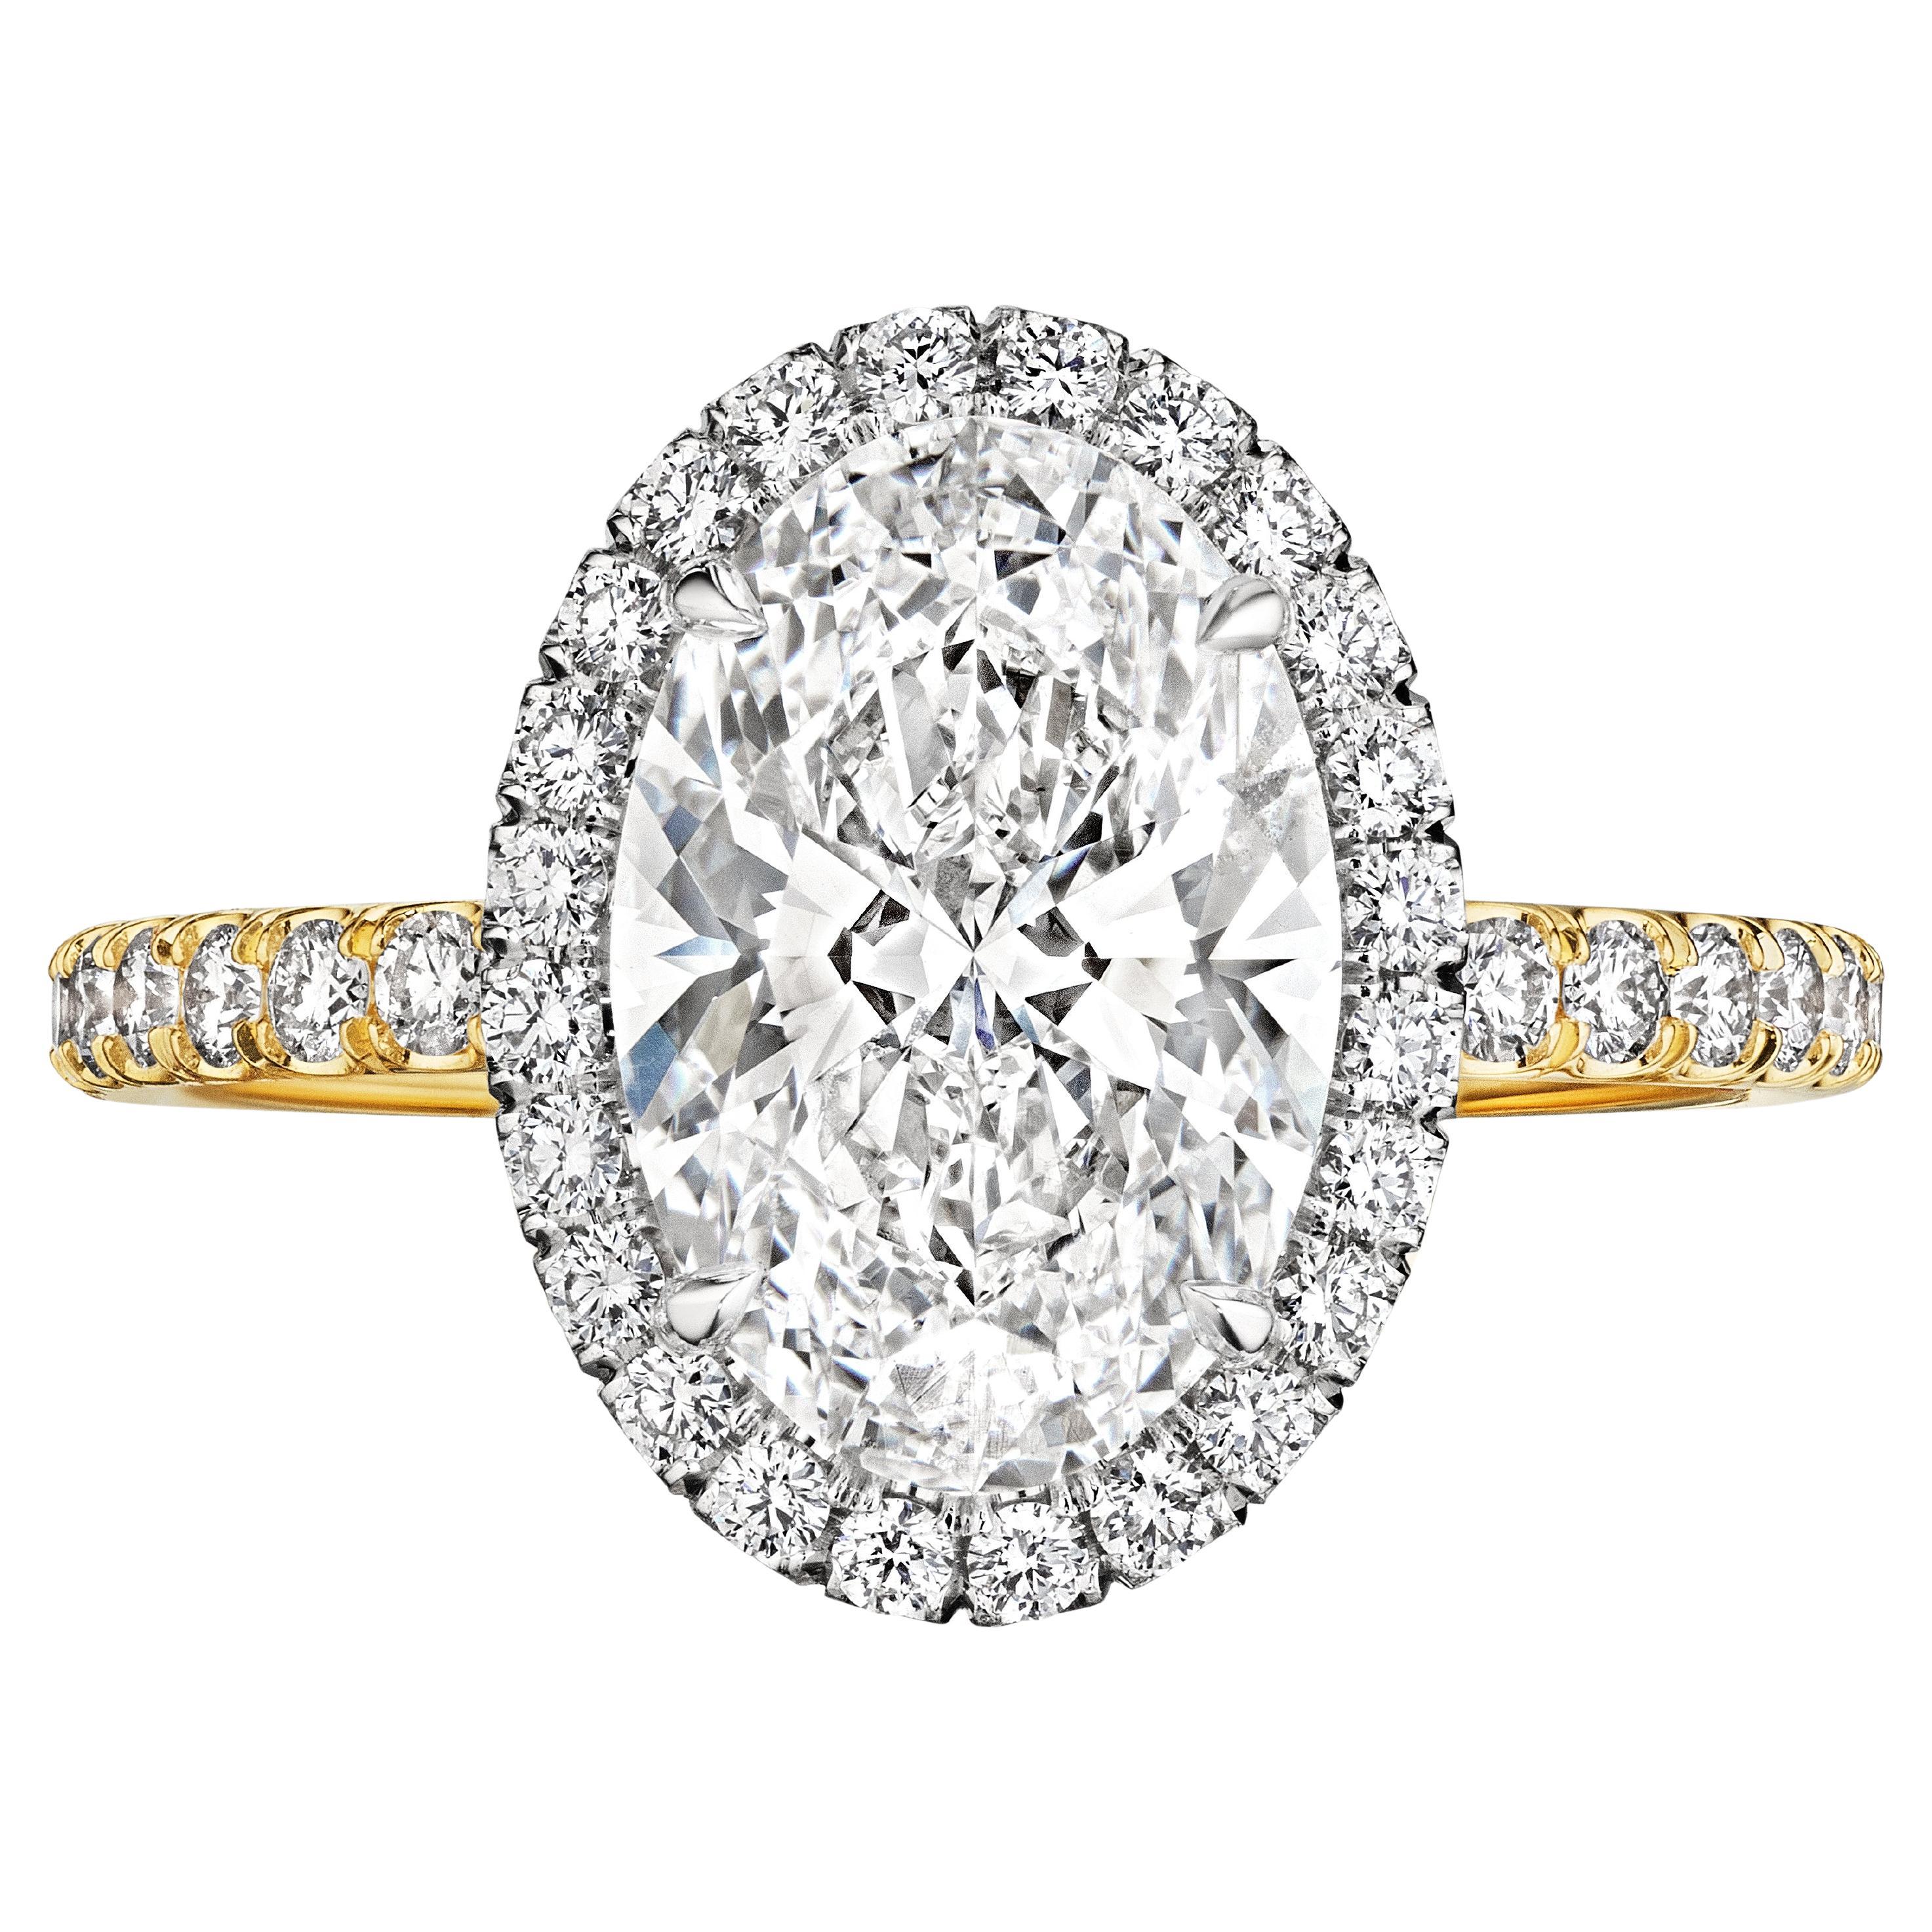 GIA Certified 2.61 Carat D VVS2 Oval Diamond Engagement Ring "Victoria"